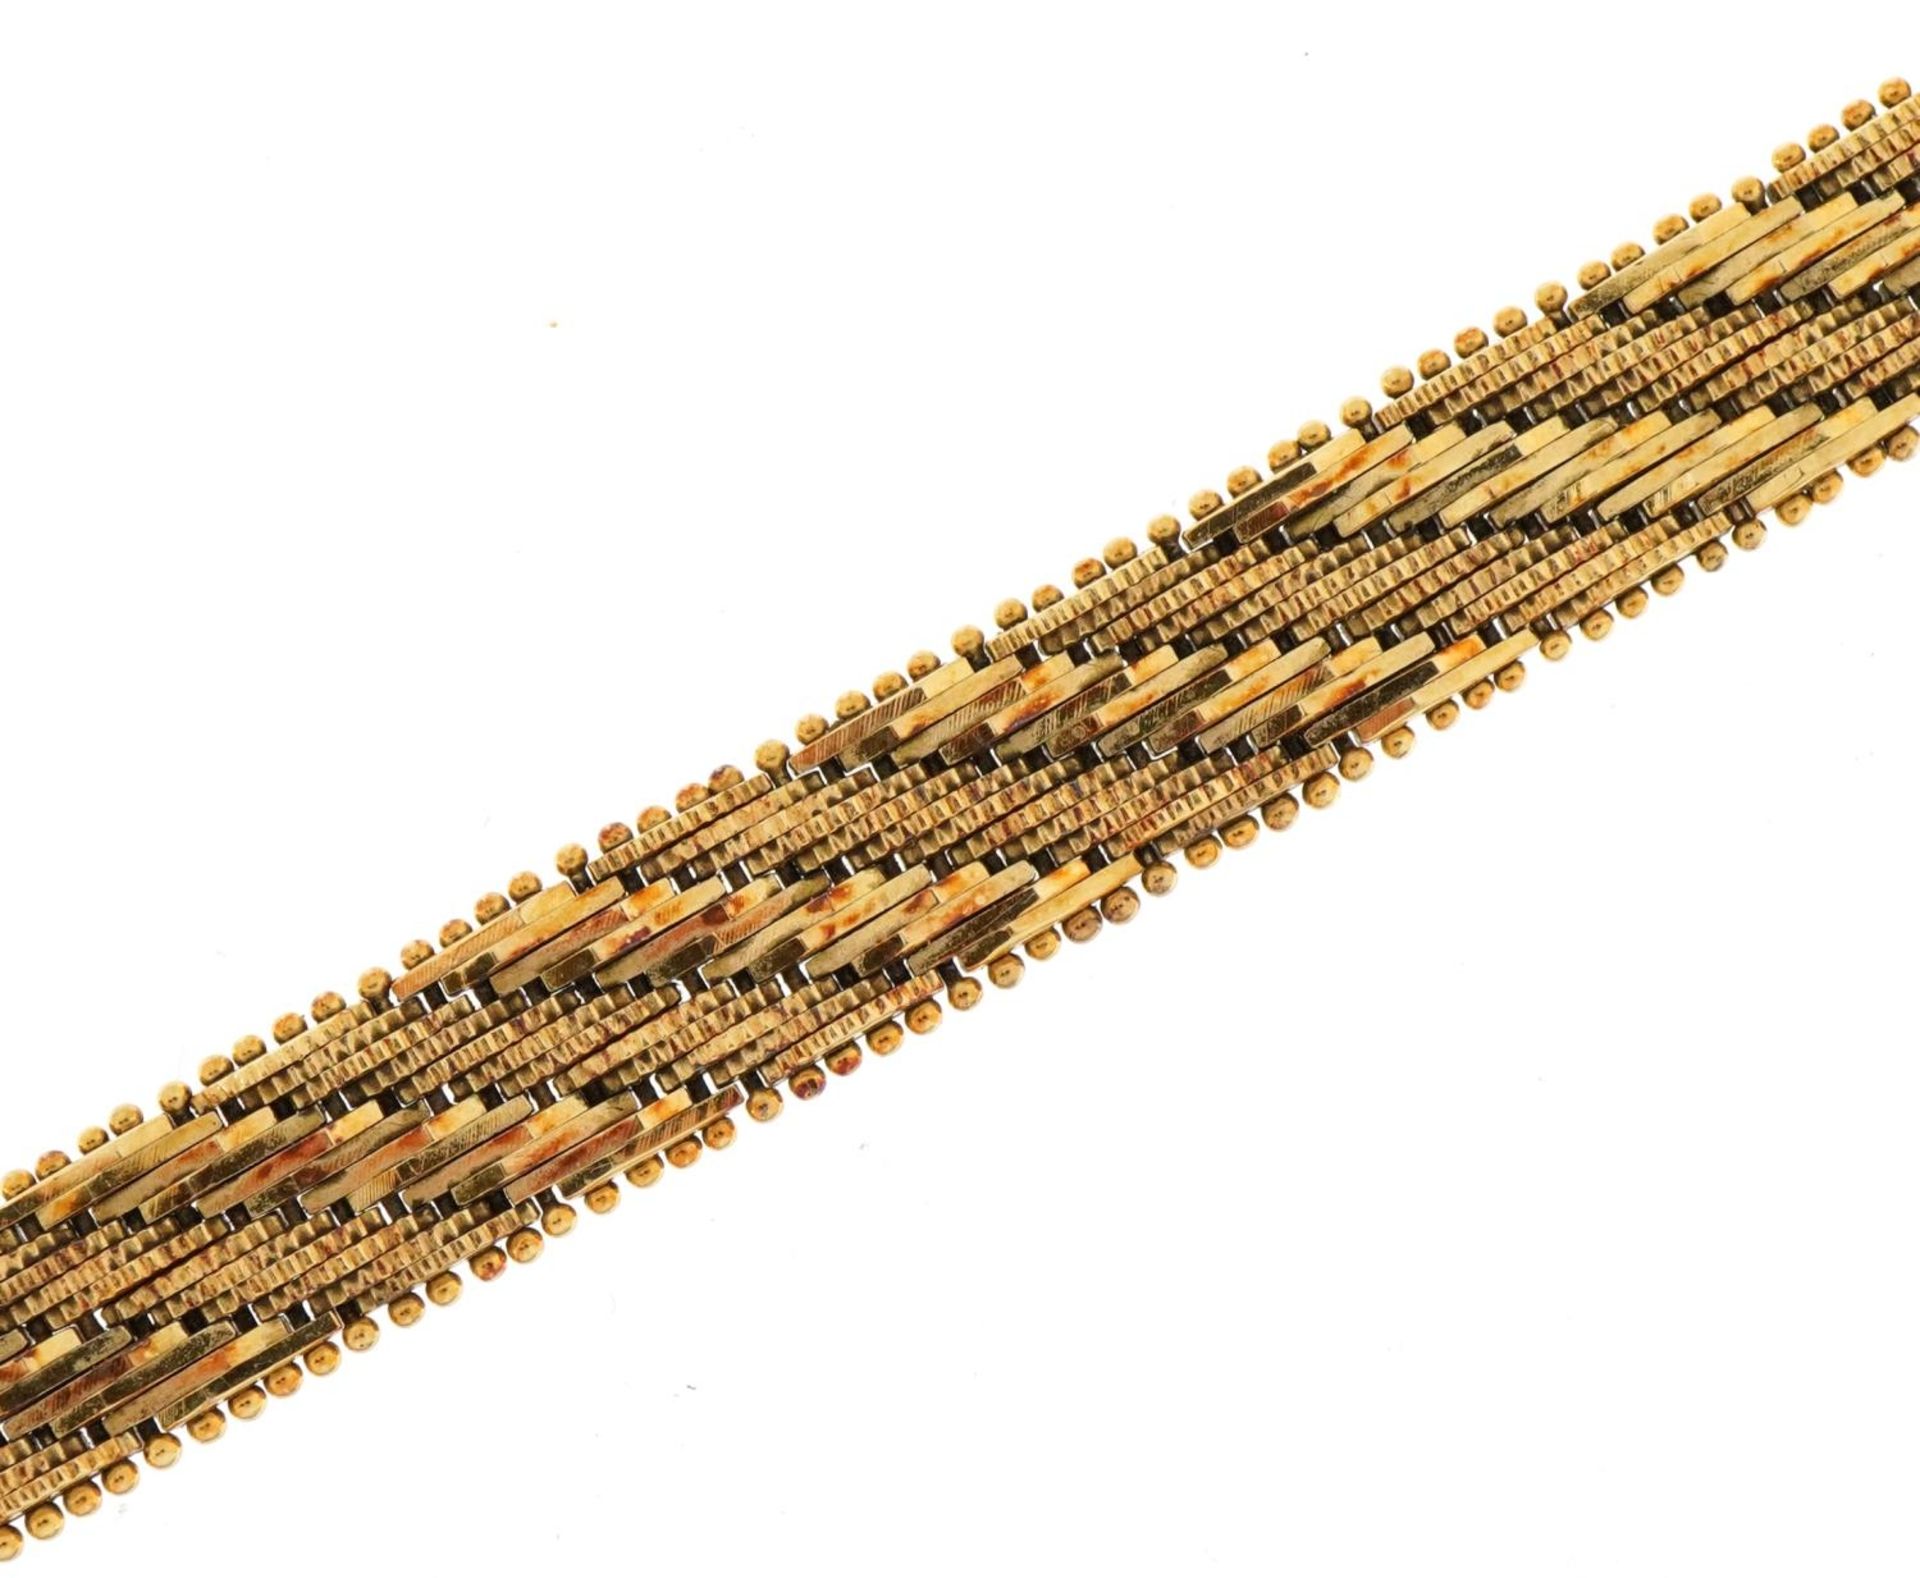 18k gold bracelet, 19.5cm in length, 26.2g : For further information on this lot please contact